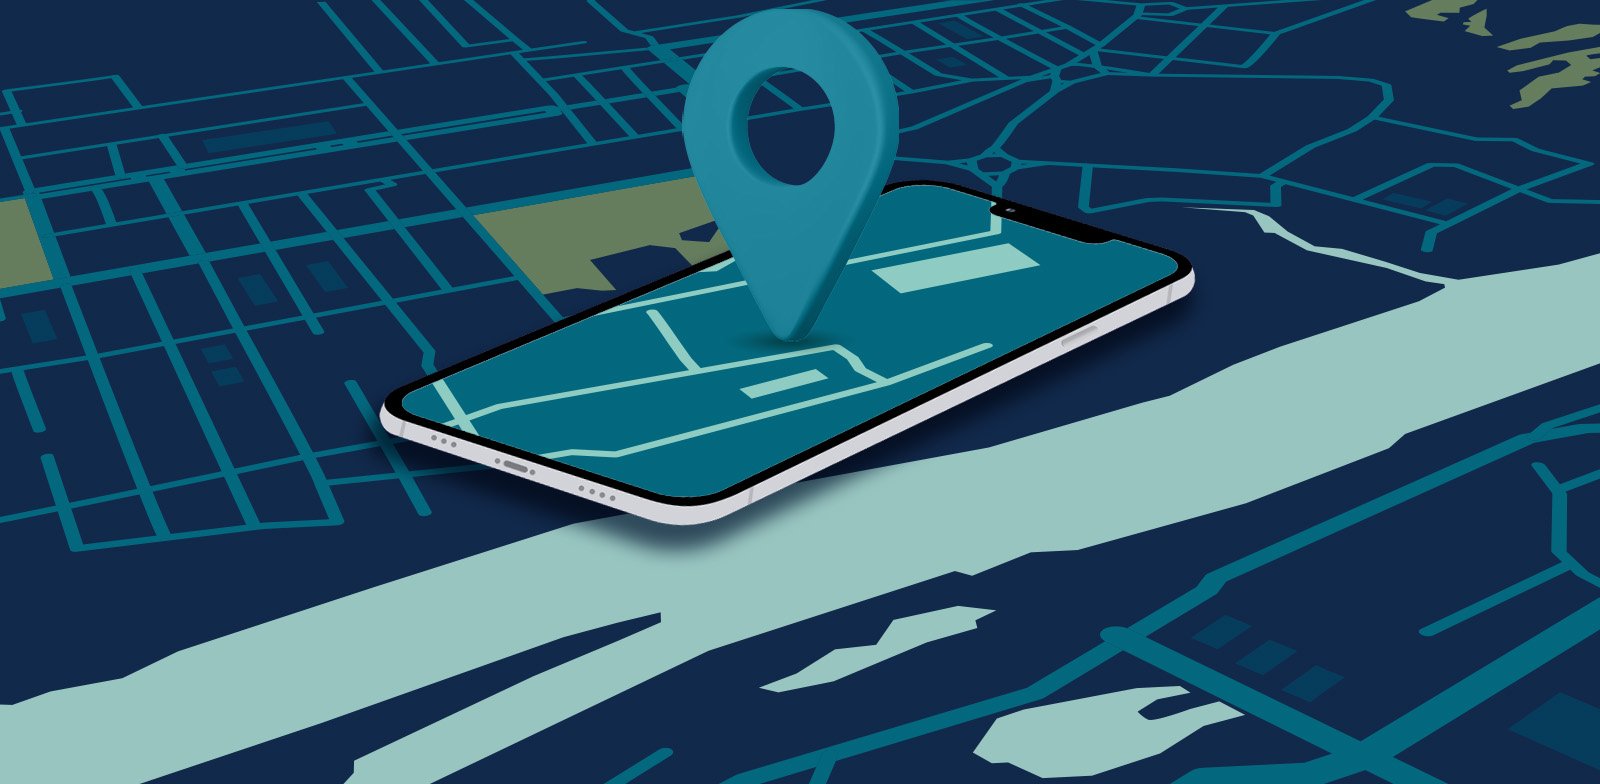 Location-Based Routing Compliance Set by FCC - Are You Ready?